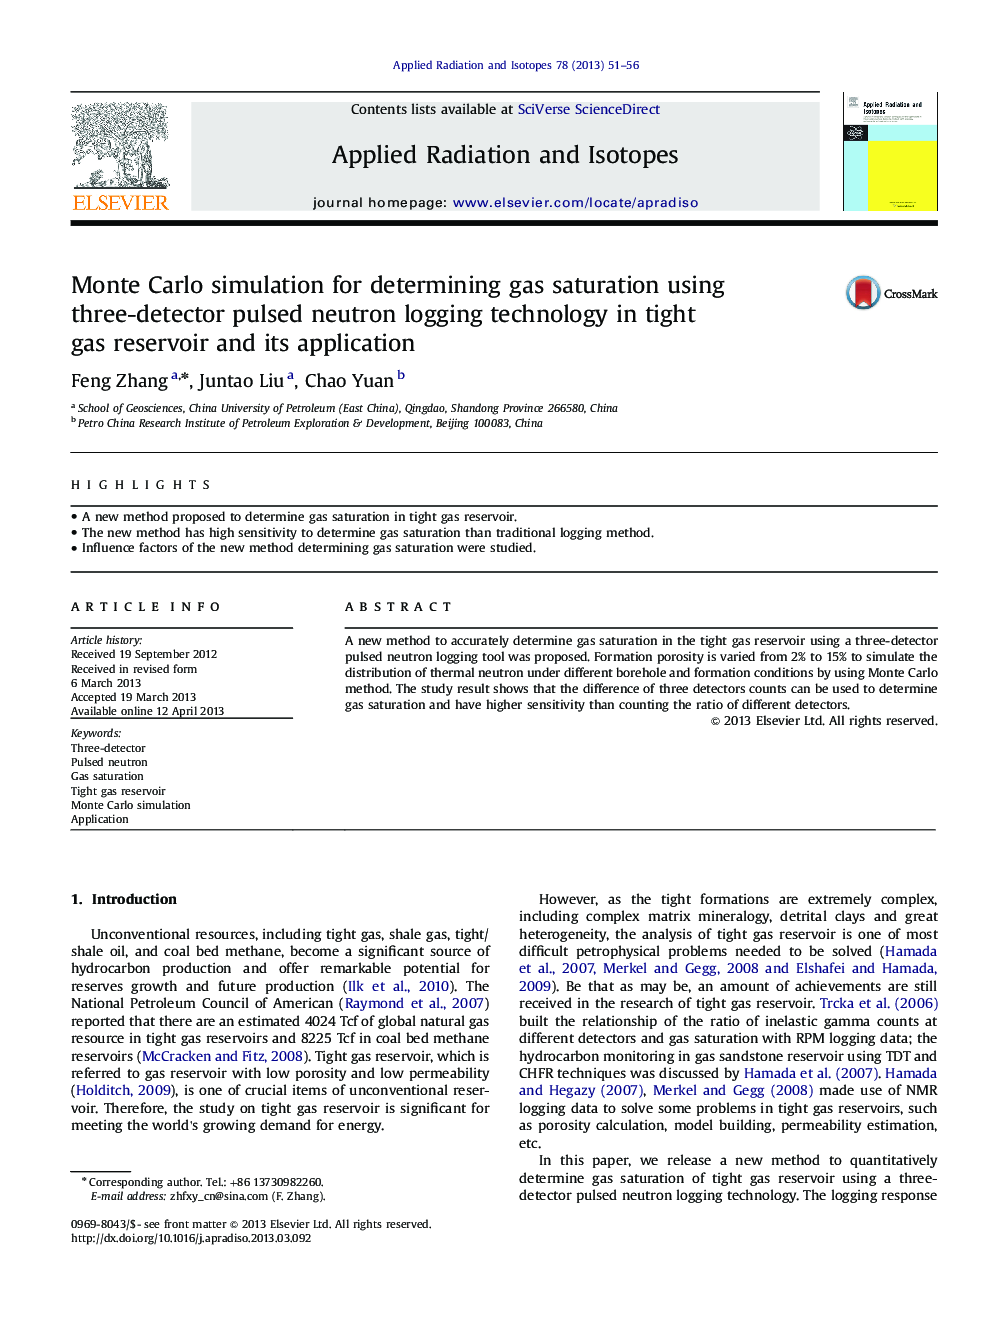 Monte Carlo simulation for determining gas saturation using three-detector pulsed neutron logging technology in tight gas reservoir and its application